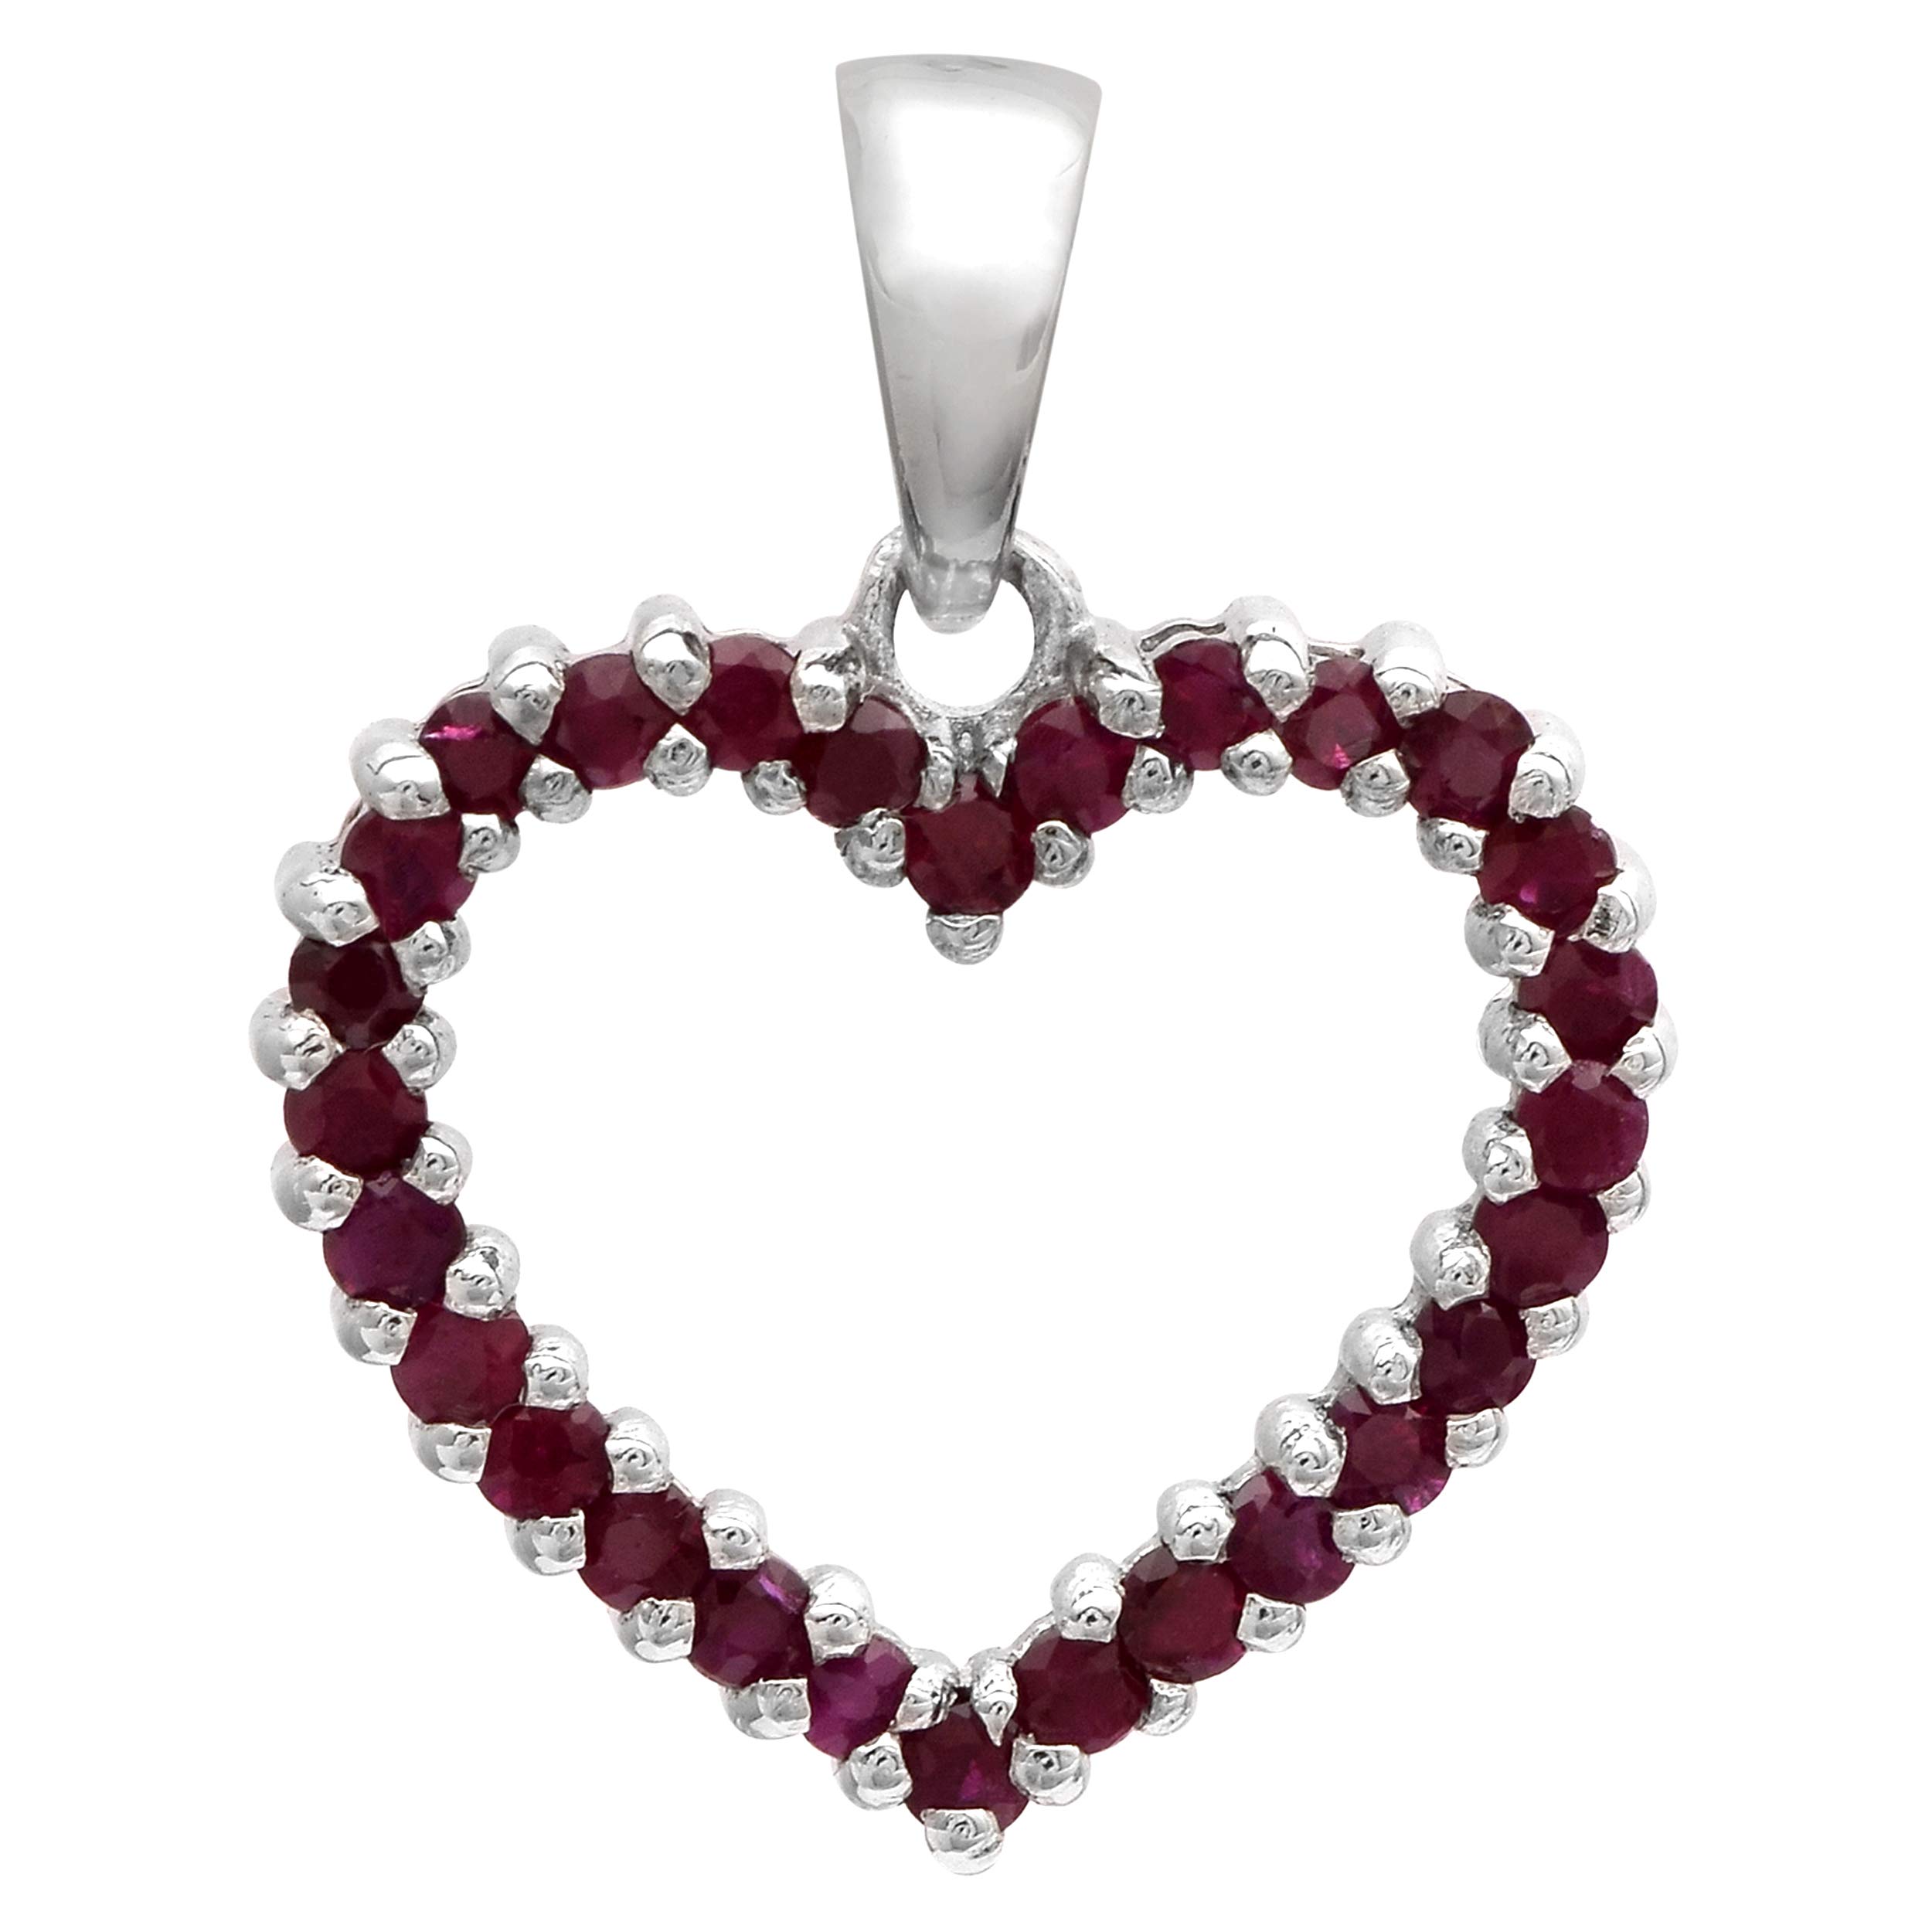 Shine Jewel Open Heart Pendant !! 925 Sterling Silver 1.20 Ctw Natural Gemstone Wedding Gift for her Pendant (ruby)